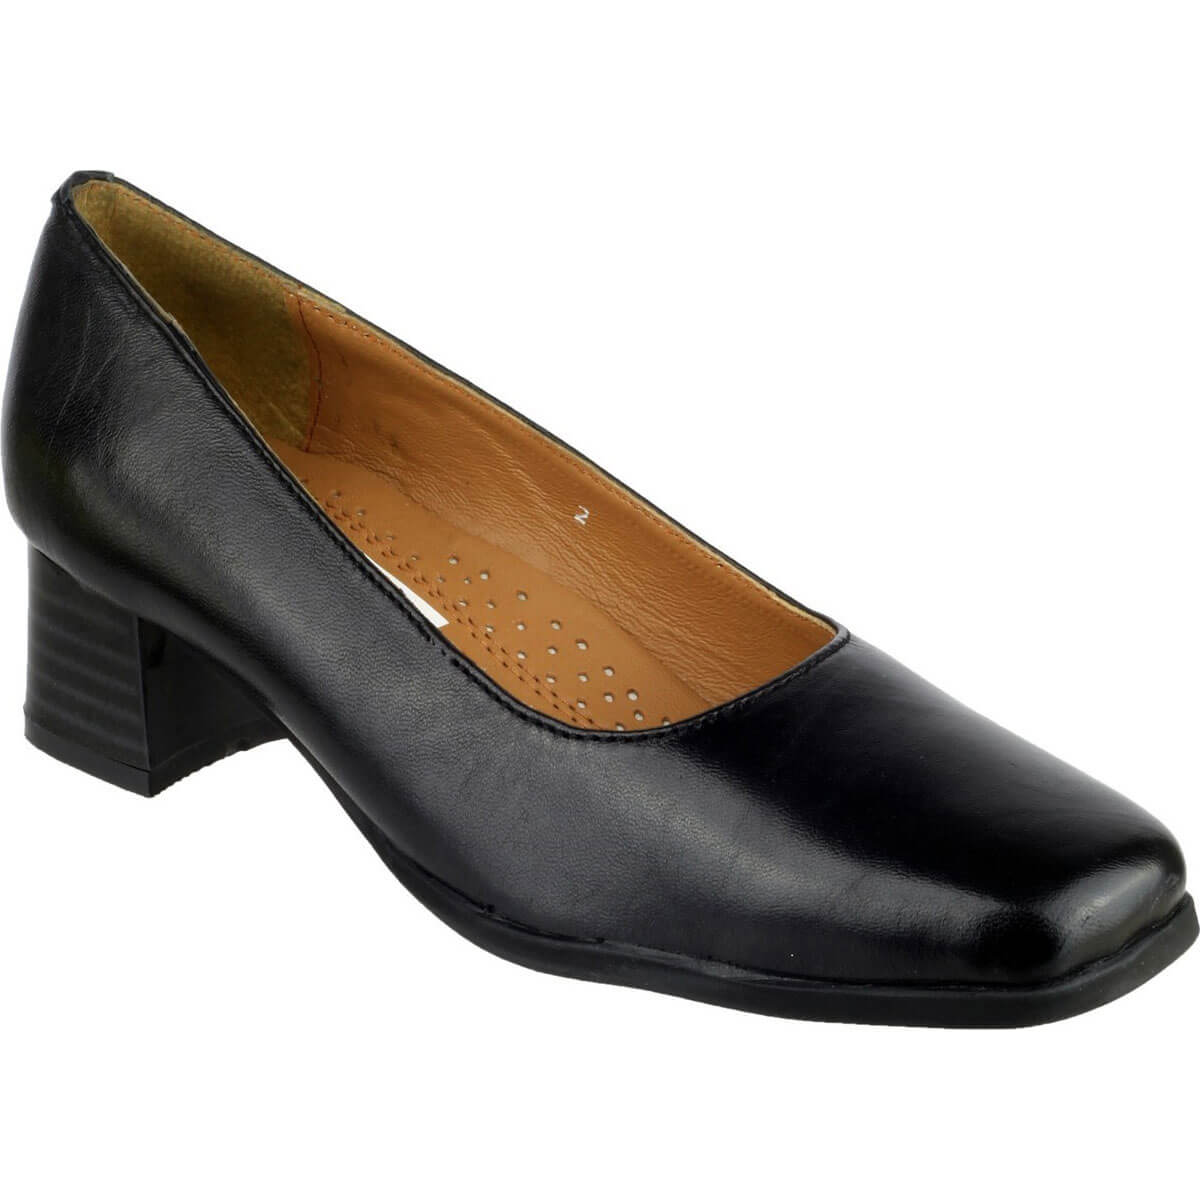 Image of Amblers Walford Ladies Shoes Leather Court Black Size 6